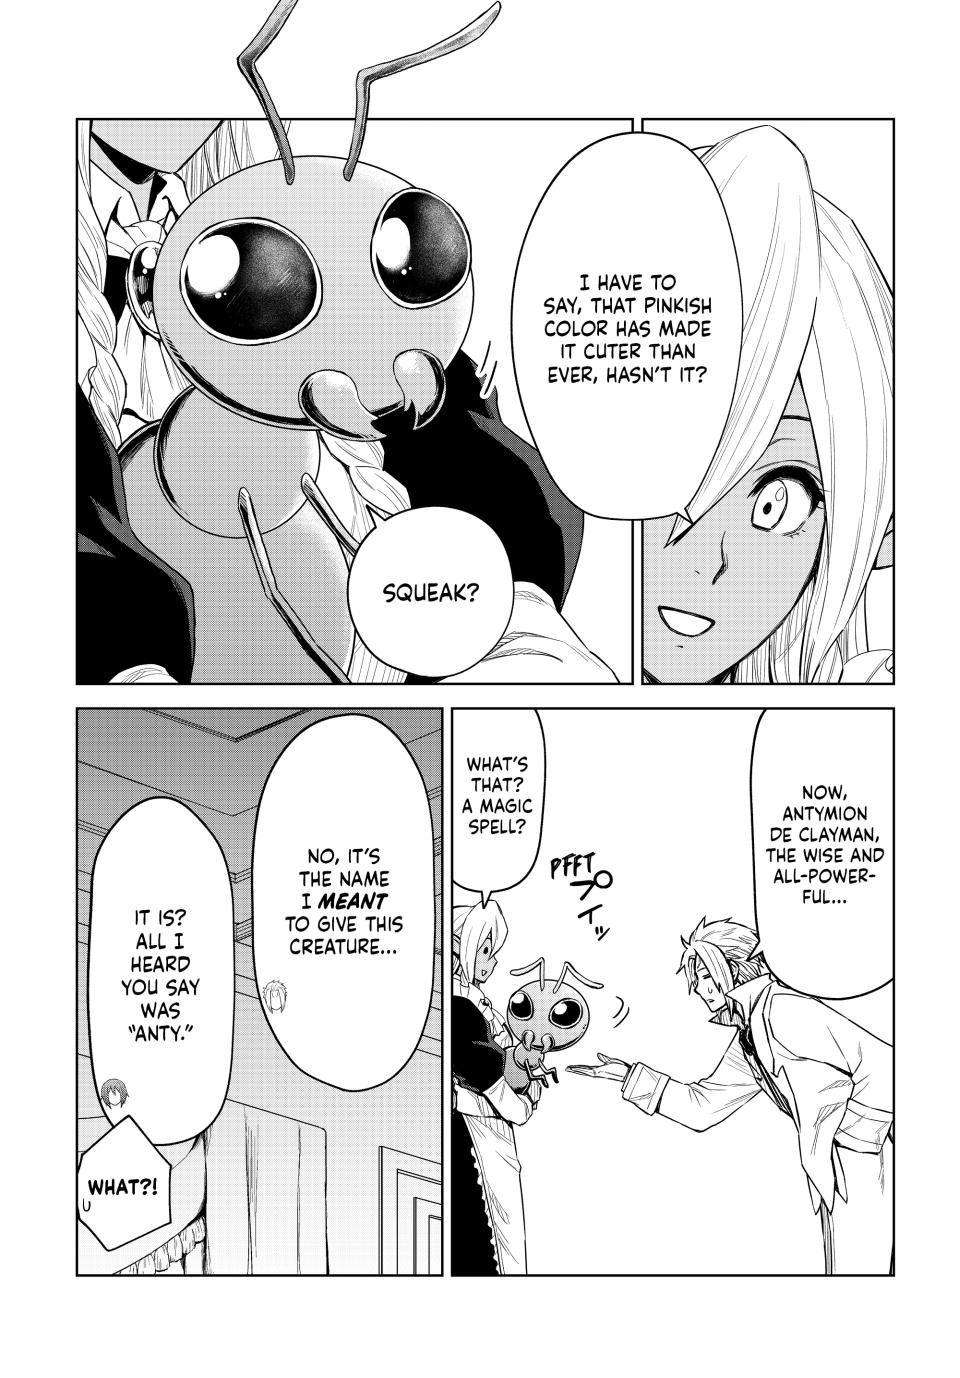 That Time I Got Reincarnated as a Slime - Clayman - chapter 24 - #4